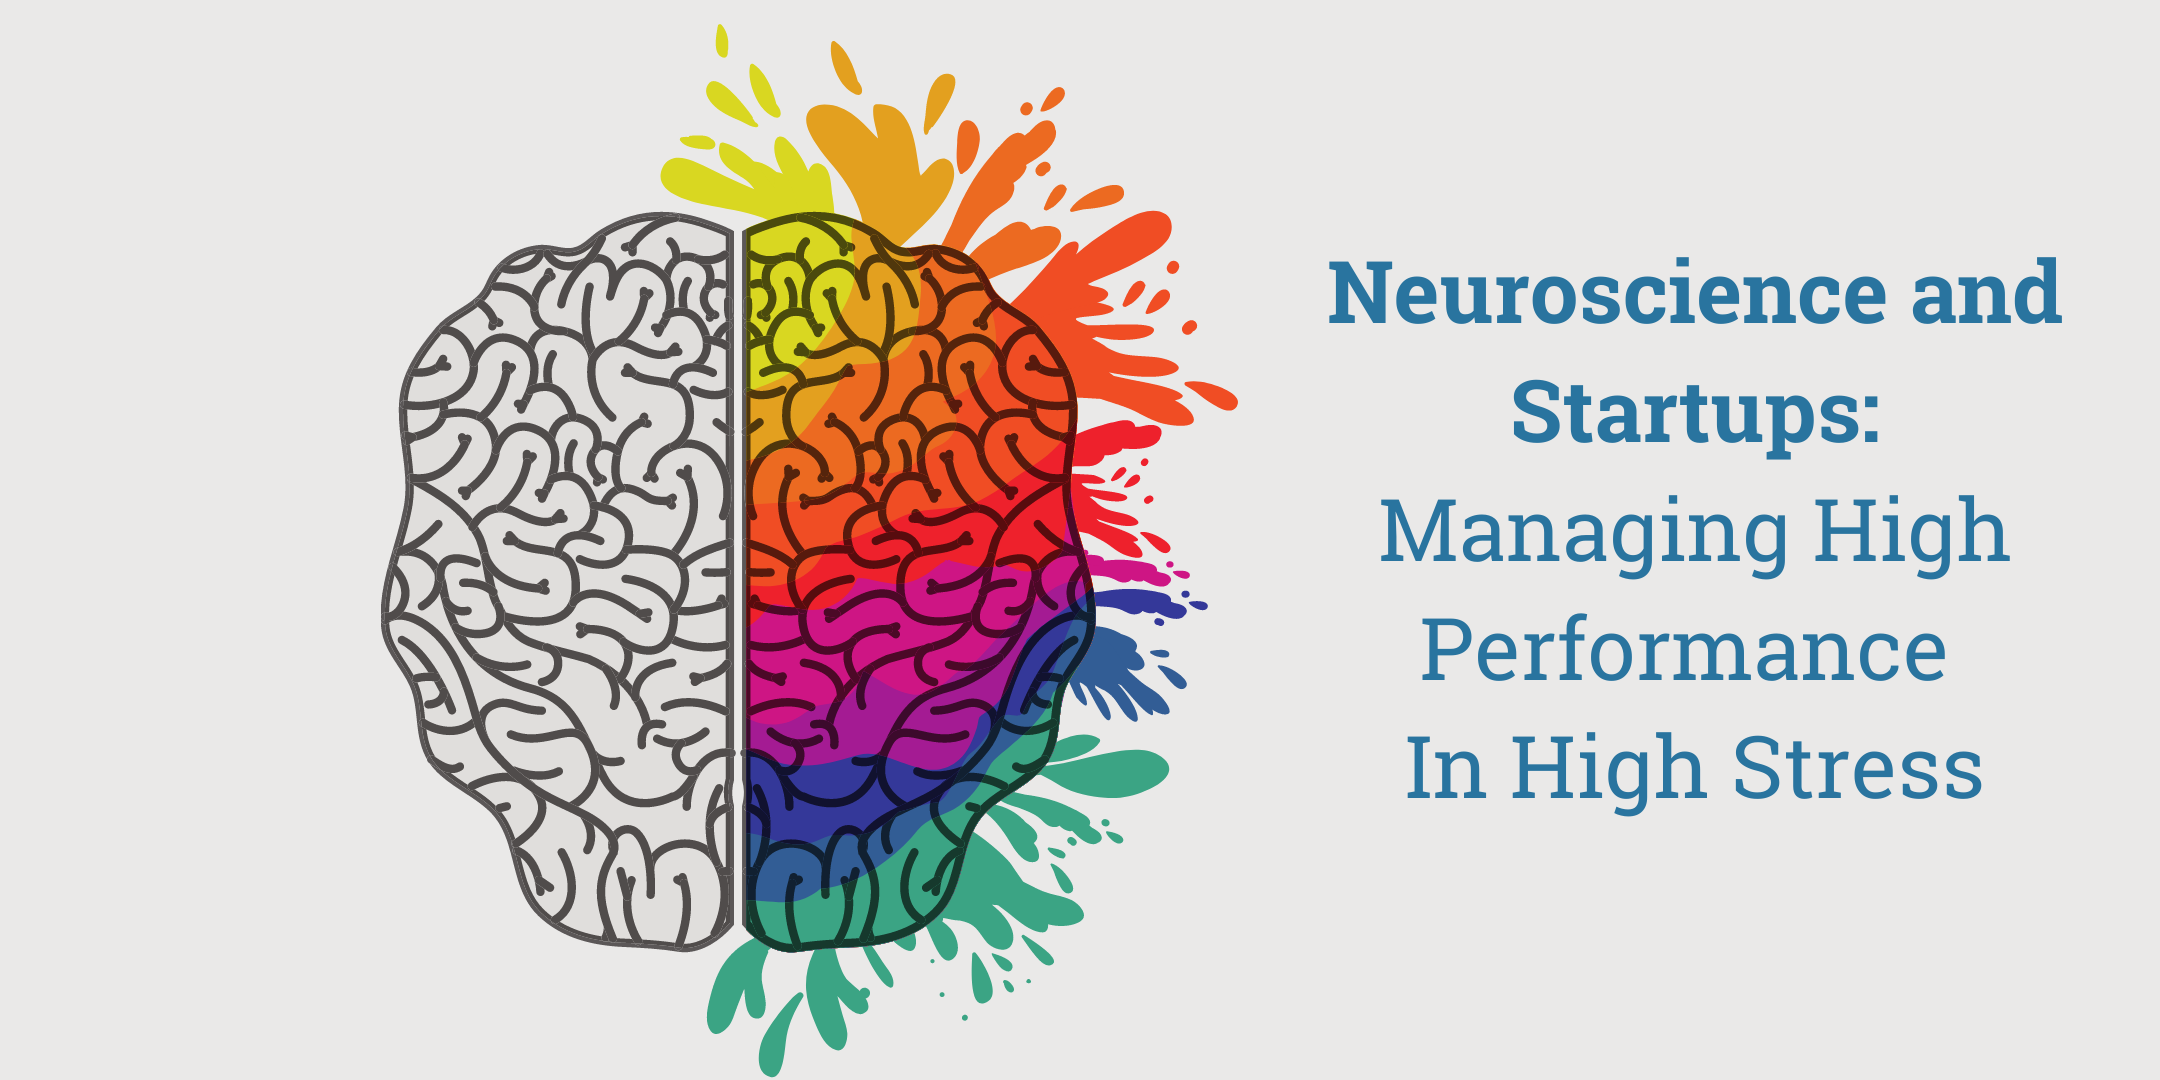 Managing High Stress and High Performance with Neuroscience